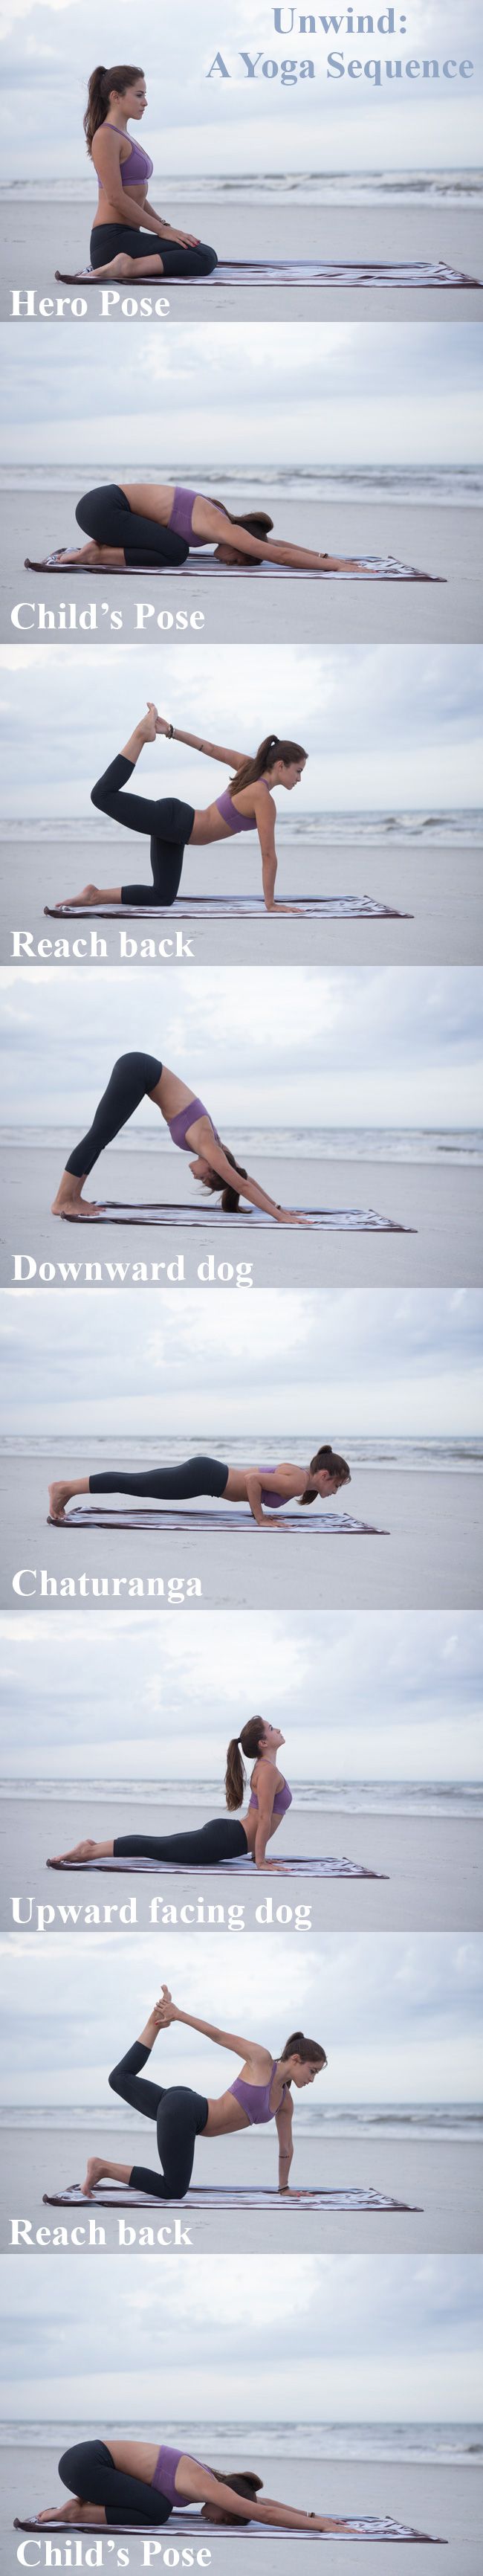 A gentle yoga sequence - pin it!